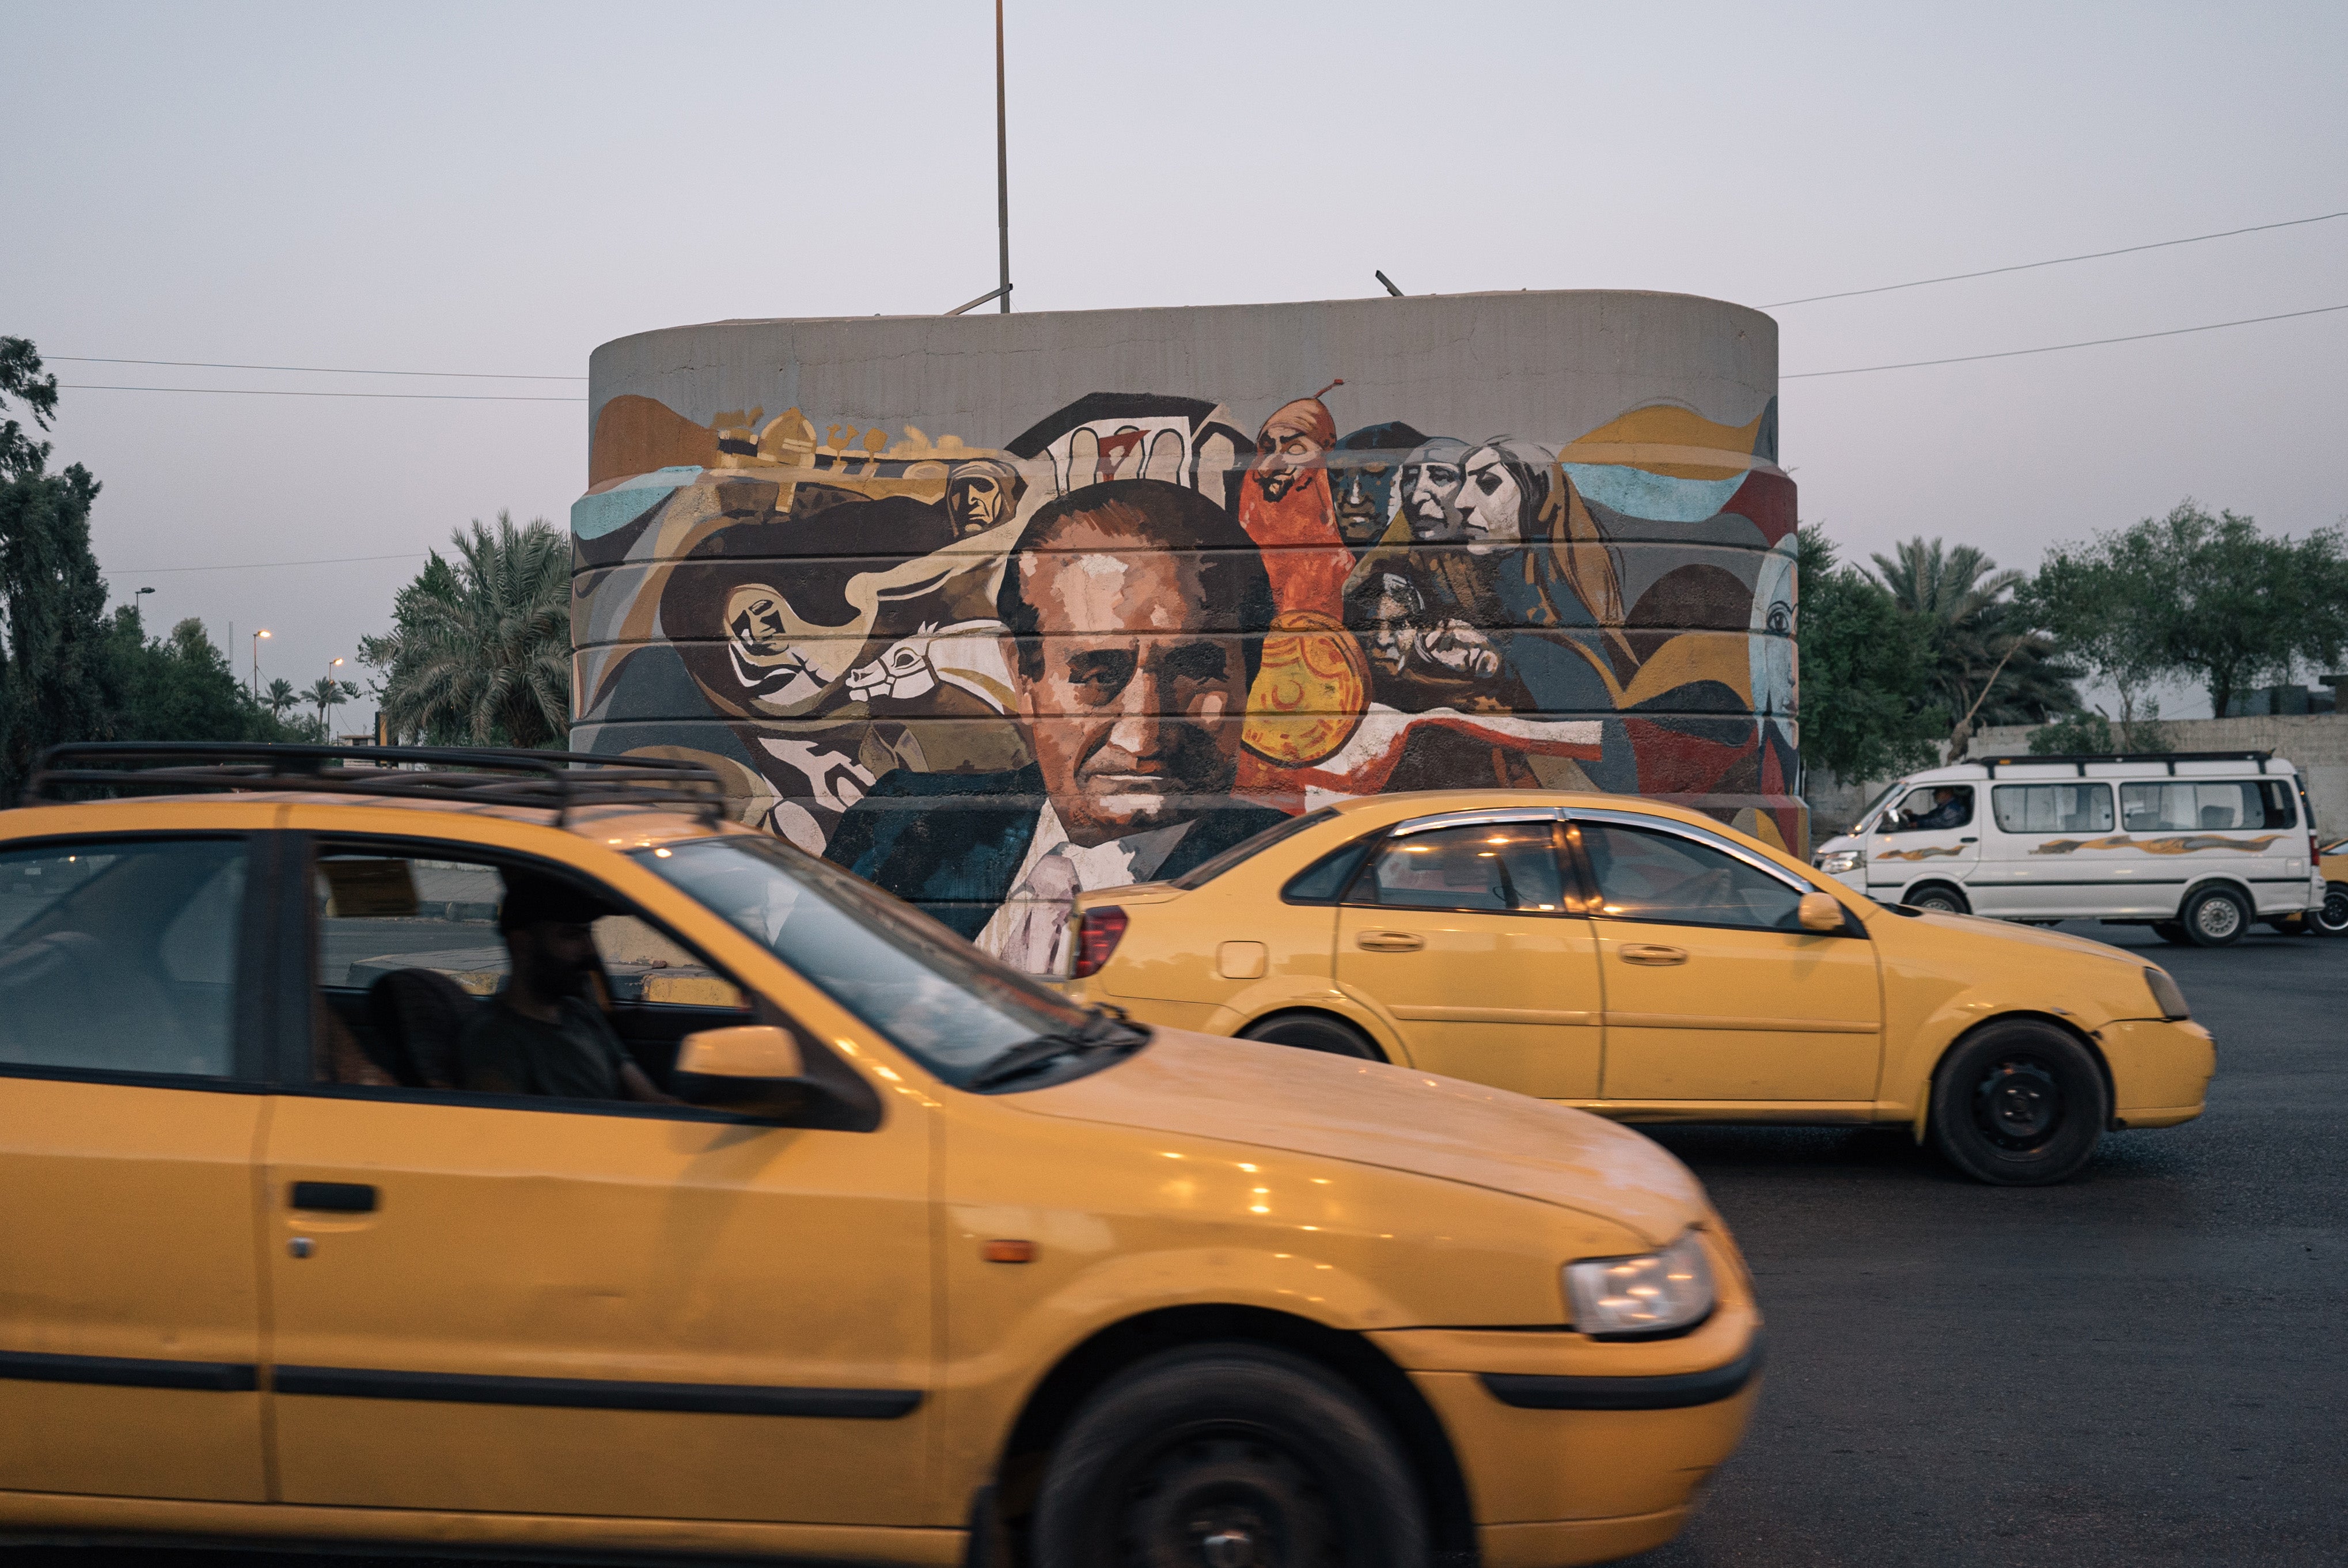 A mural in Baghdad depicts the late Iraqi artist Mahood Ahmed, one of several painted by Wijdan al-Majed